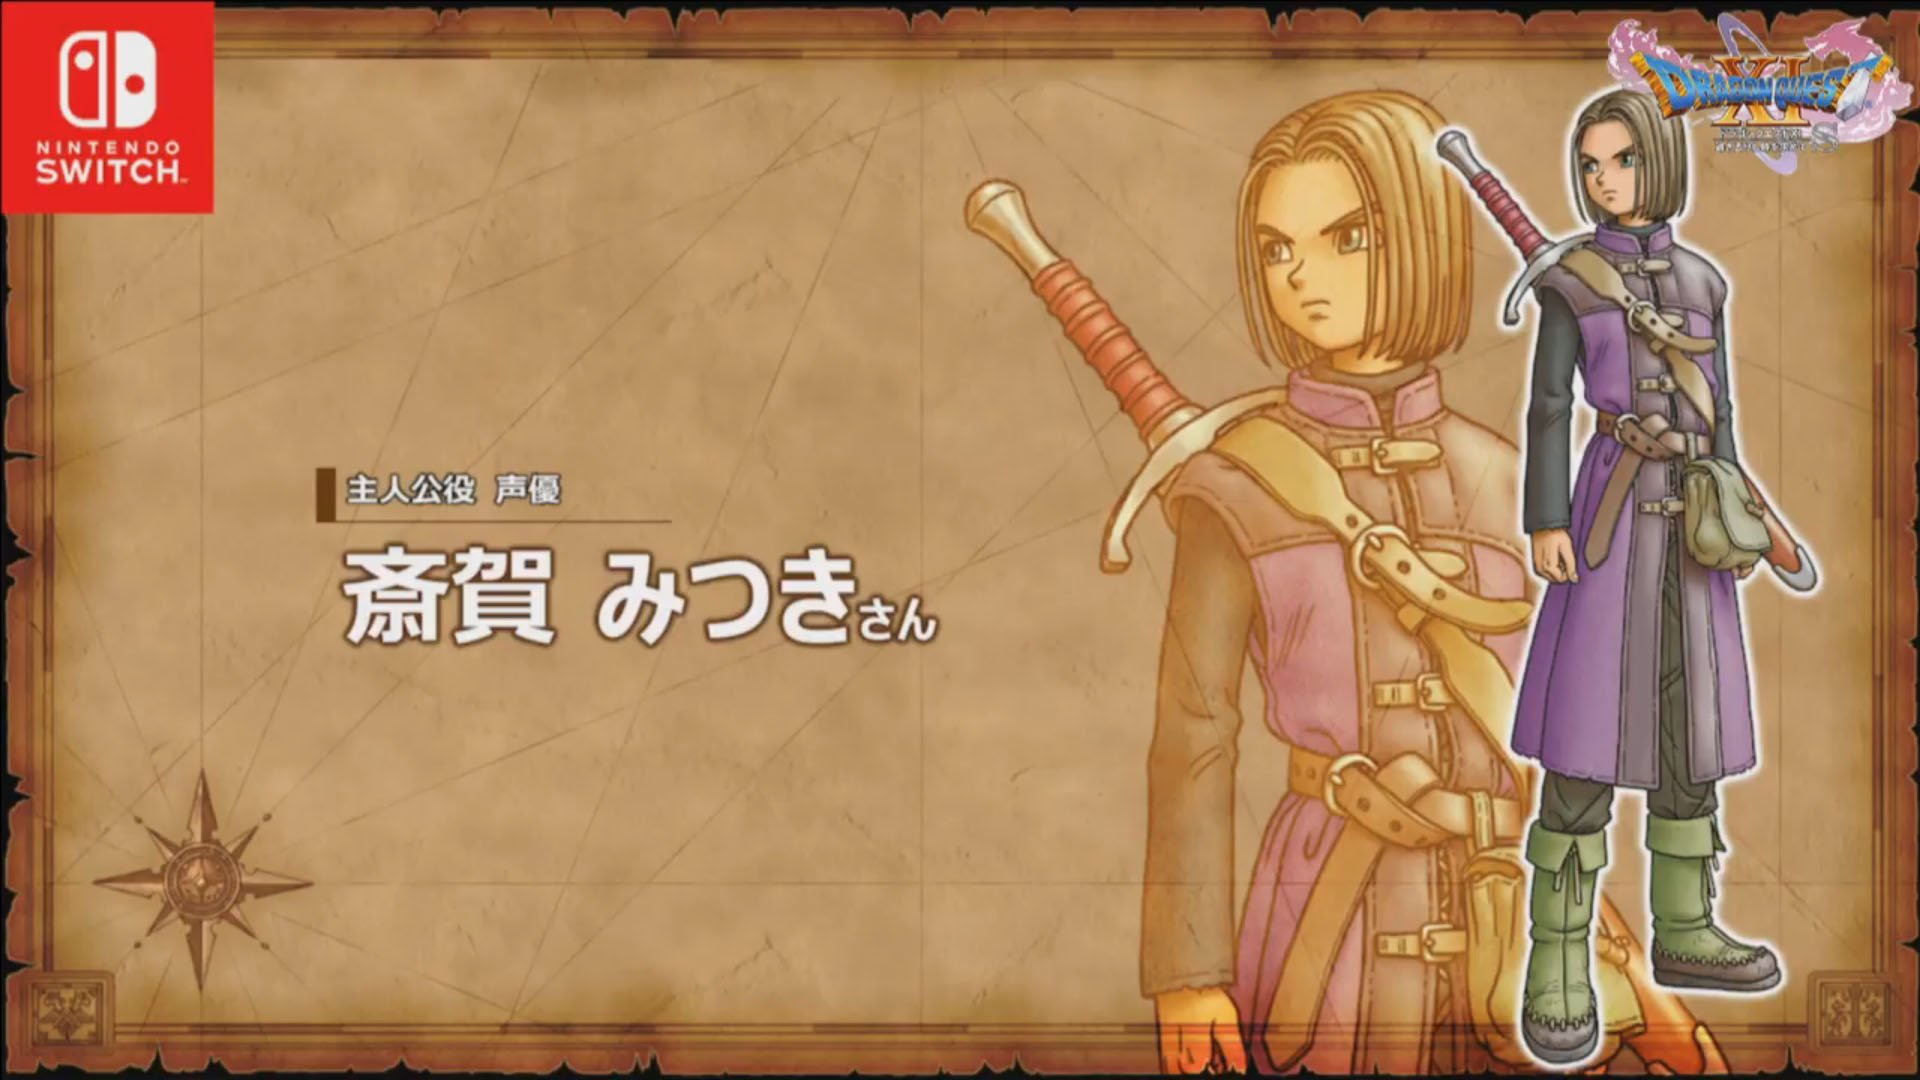 Dragon Quest Xi S Introduces Japanese Voice Actors For The Protagonist King Carnelian Hendrik And More Gematsu